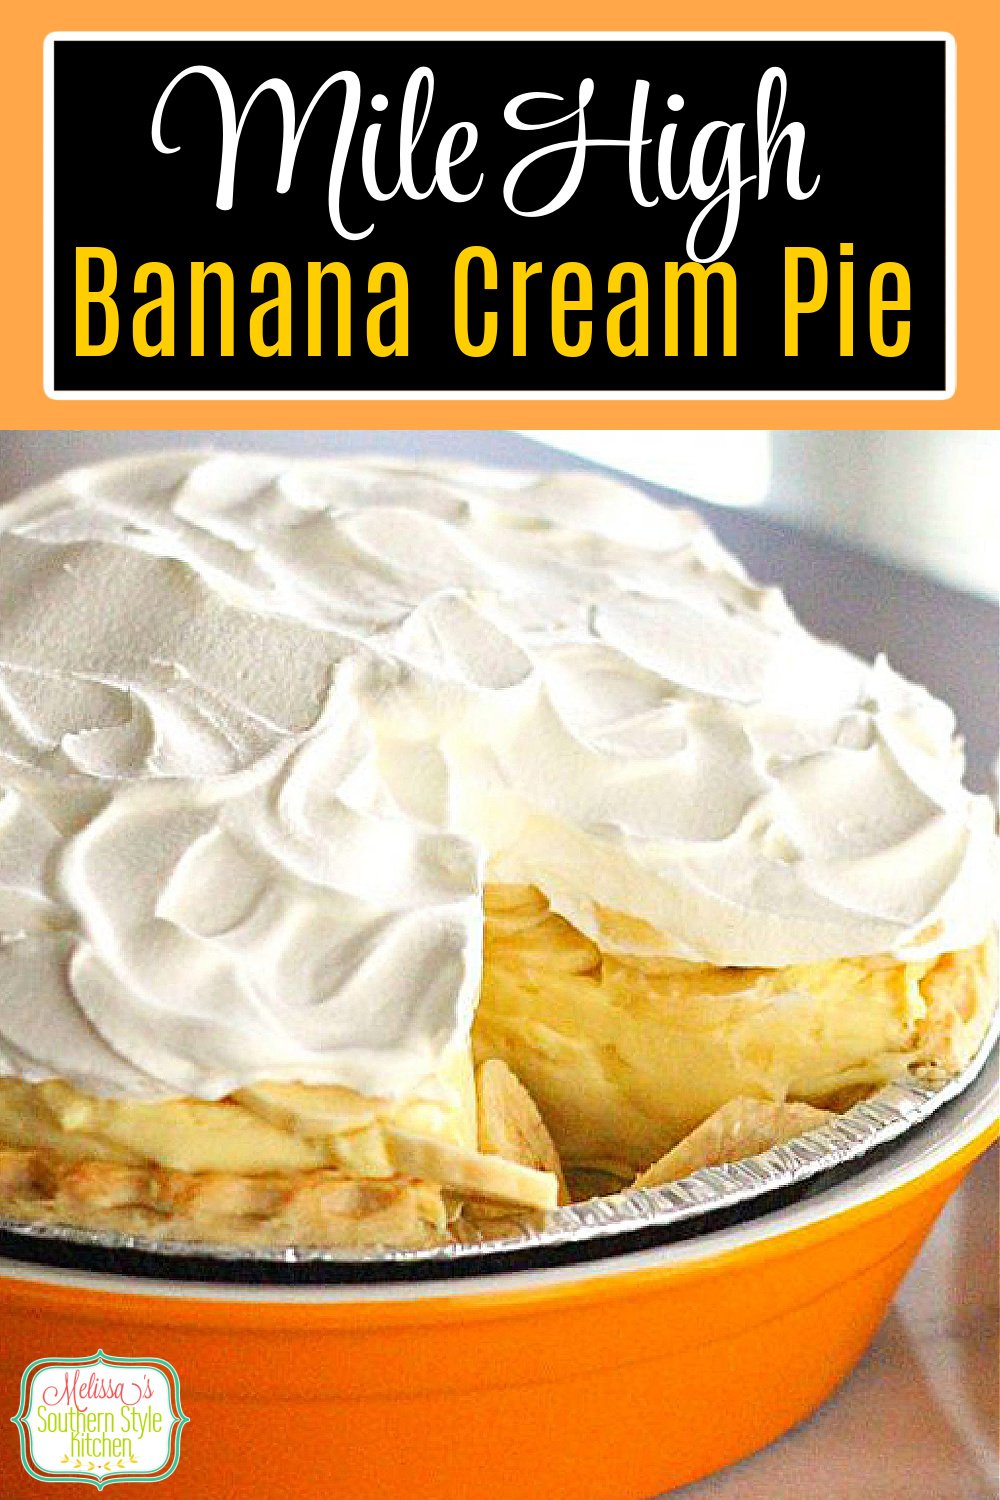 This Mile High Banana Cream Pie is easy to make and eat! #bananacreampie #bananapudding #bananadesserts #bananarecipes #desserts #dessertfoodrecipes #sweet #southernfood #southernrecipes #picnicfood #holidaydesserts #pies via @melissasssk